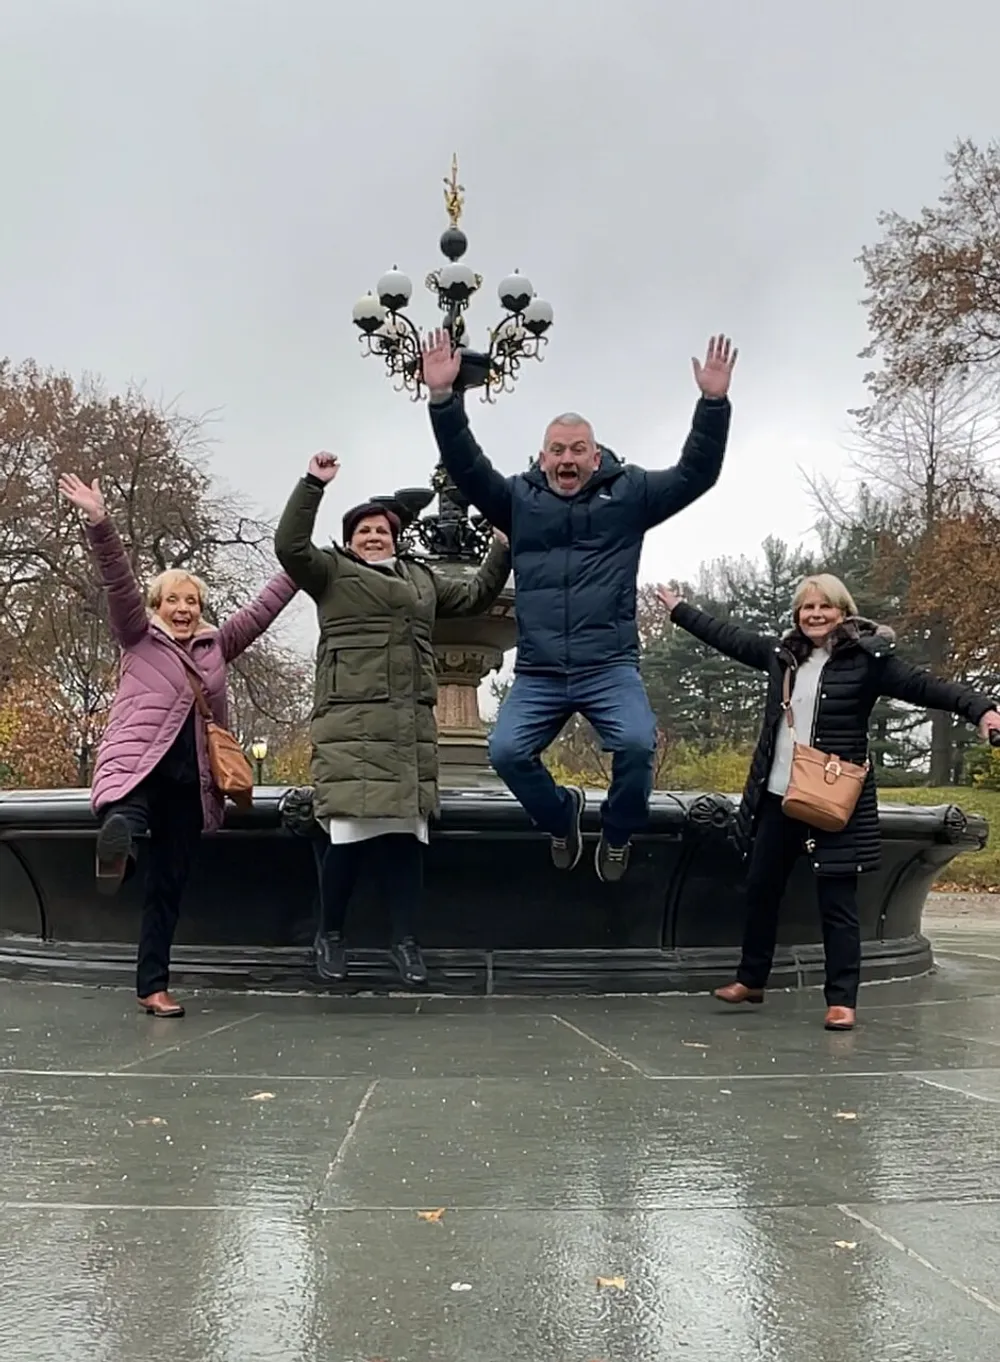 Four people are cheerfully posing with raised arms and jumping in front of an ornate lamp post capturing a moment of joy